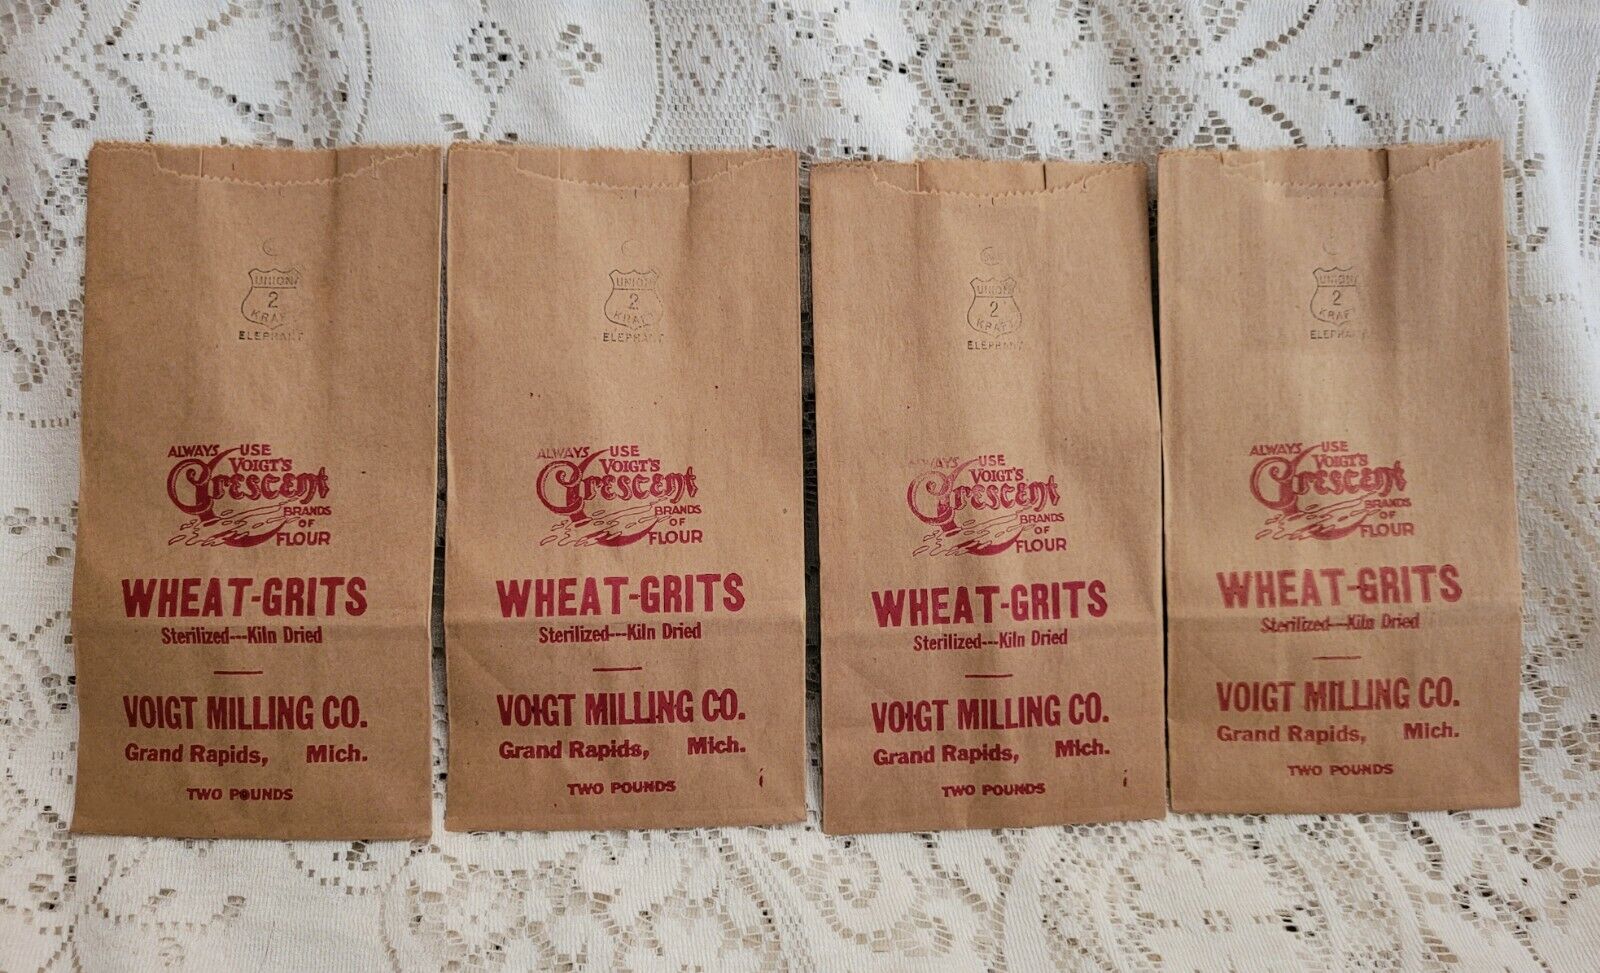  Vintage Lot Of 11 2lb Voigts Crescent Brand Wheat-Grits Brown Bags. Union Made.